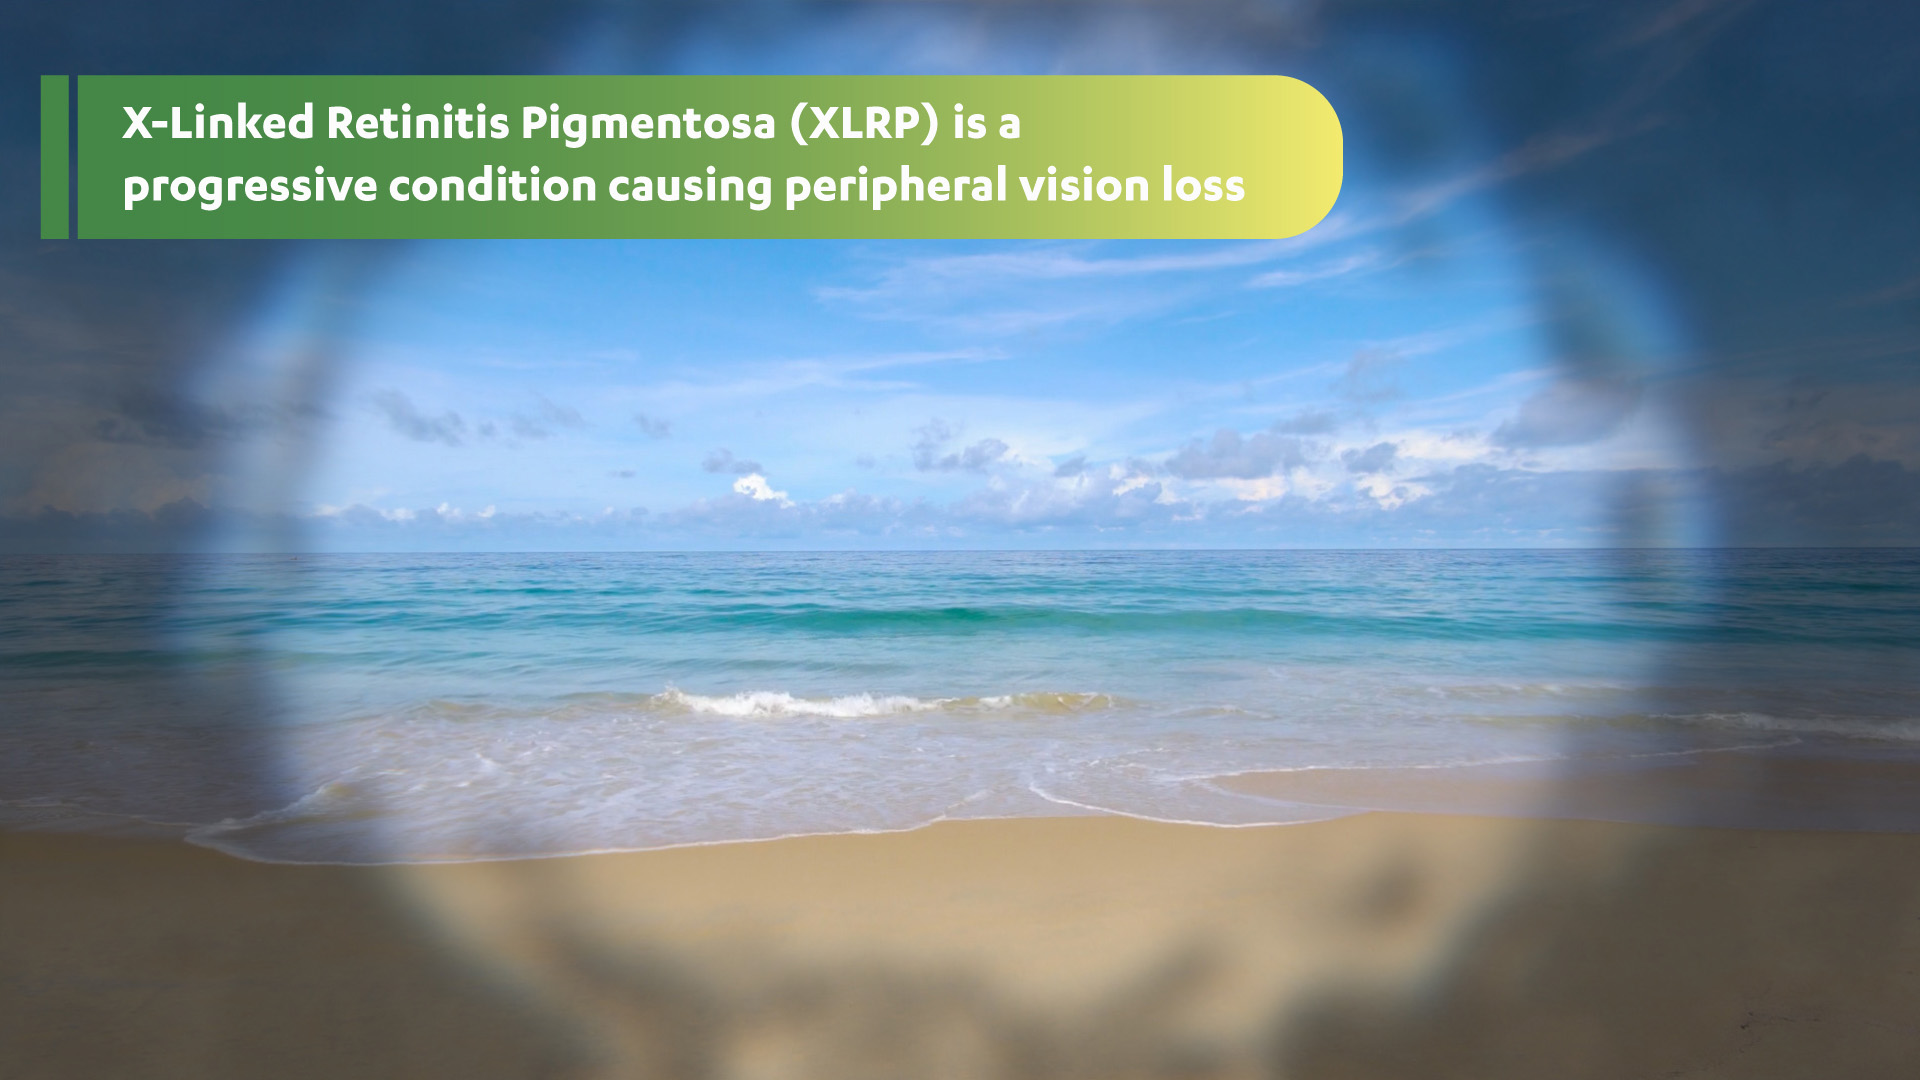 X-linked retinitis pigmentosa is a progressive condition causing peripheral vision loss: Photo of a beach with clear blue water on a sunny day showing the darkening and blurring of the outer ring of peripheral vision.